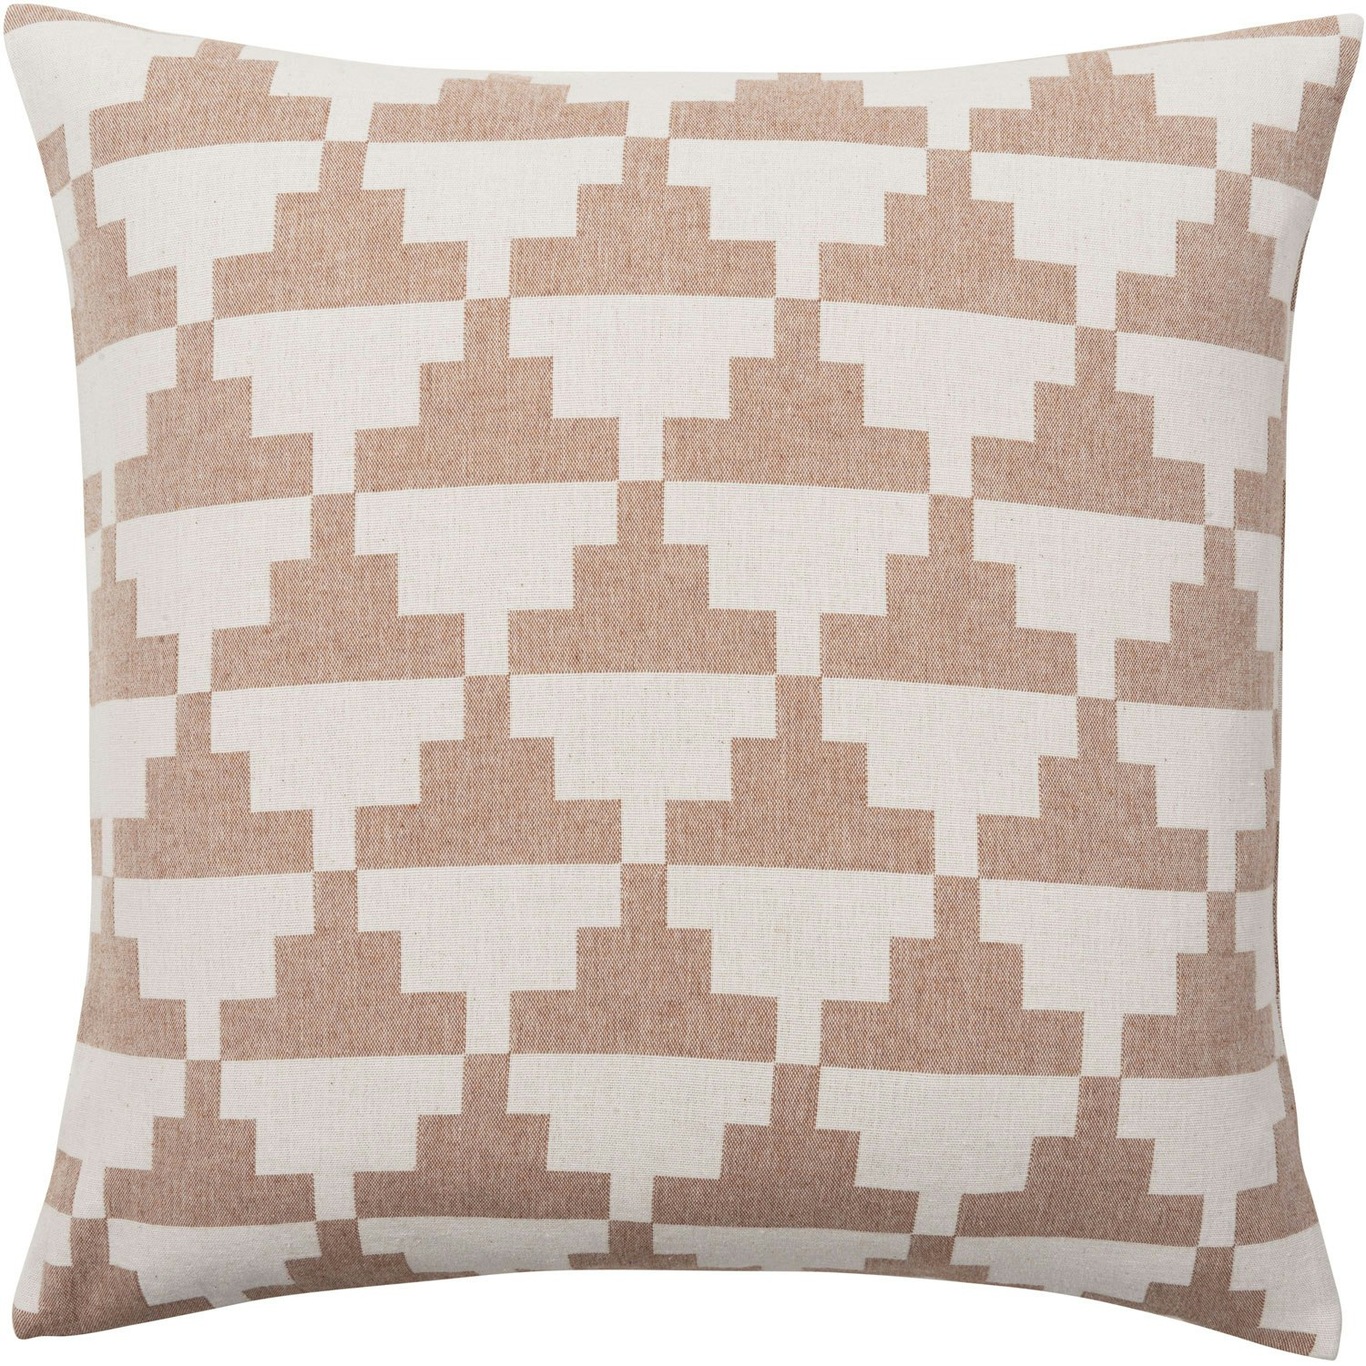 Confect Cushion Cover 50x50 cm, Nude